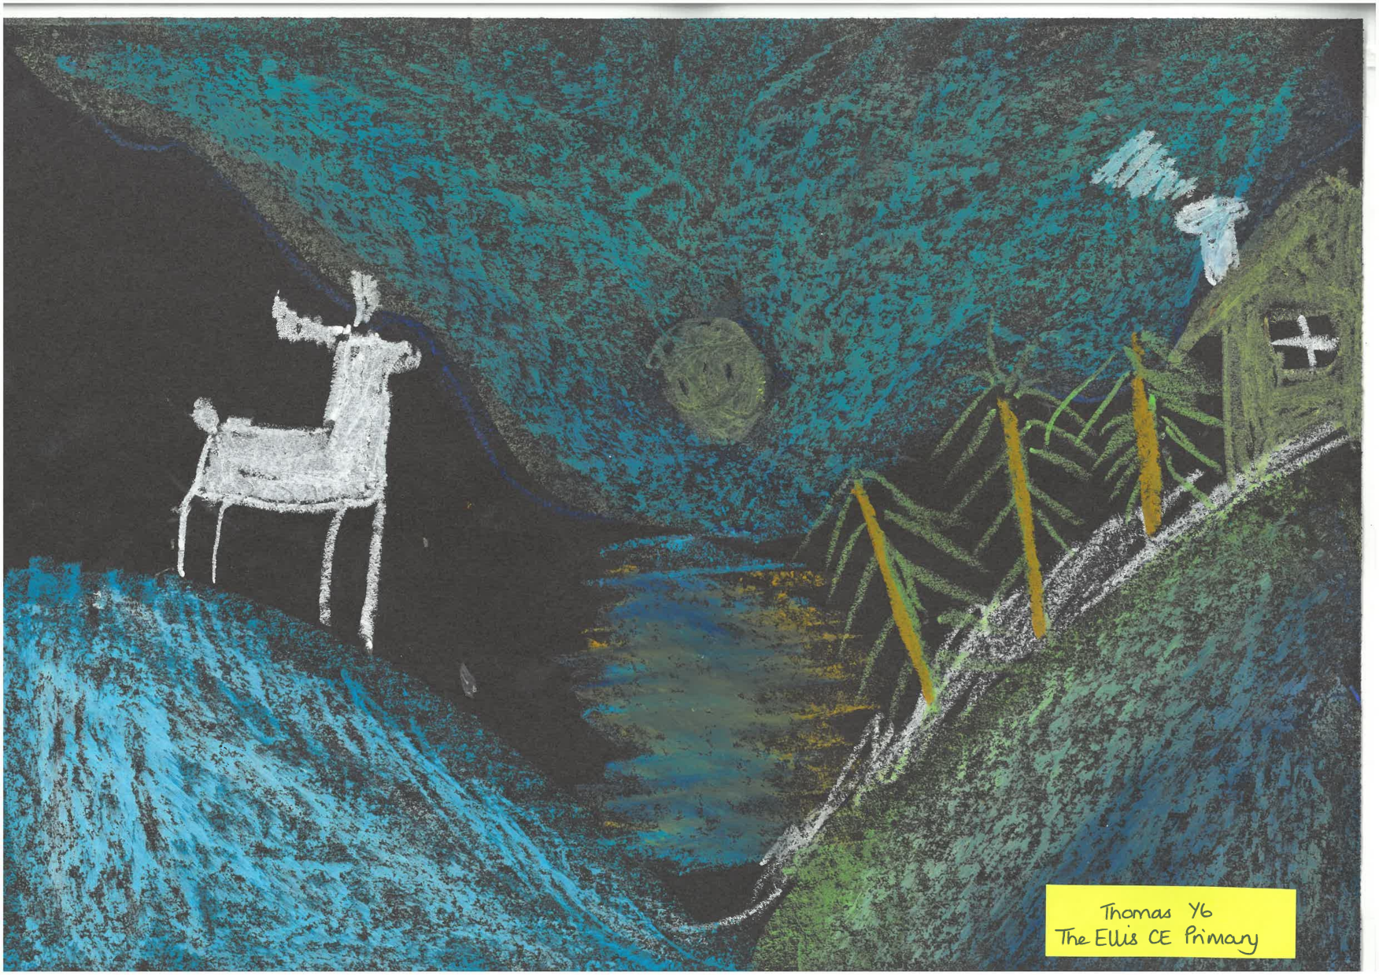 Thomas' artwork from Ellis Church of England Primary School, showing a deer on top of a hill.